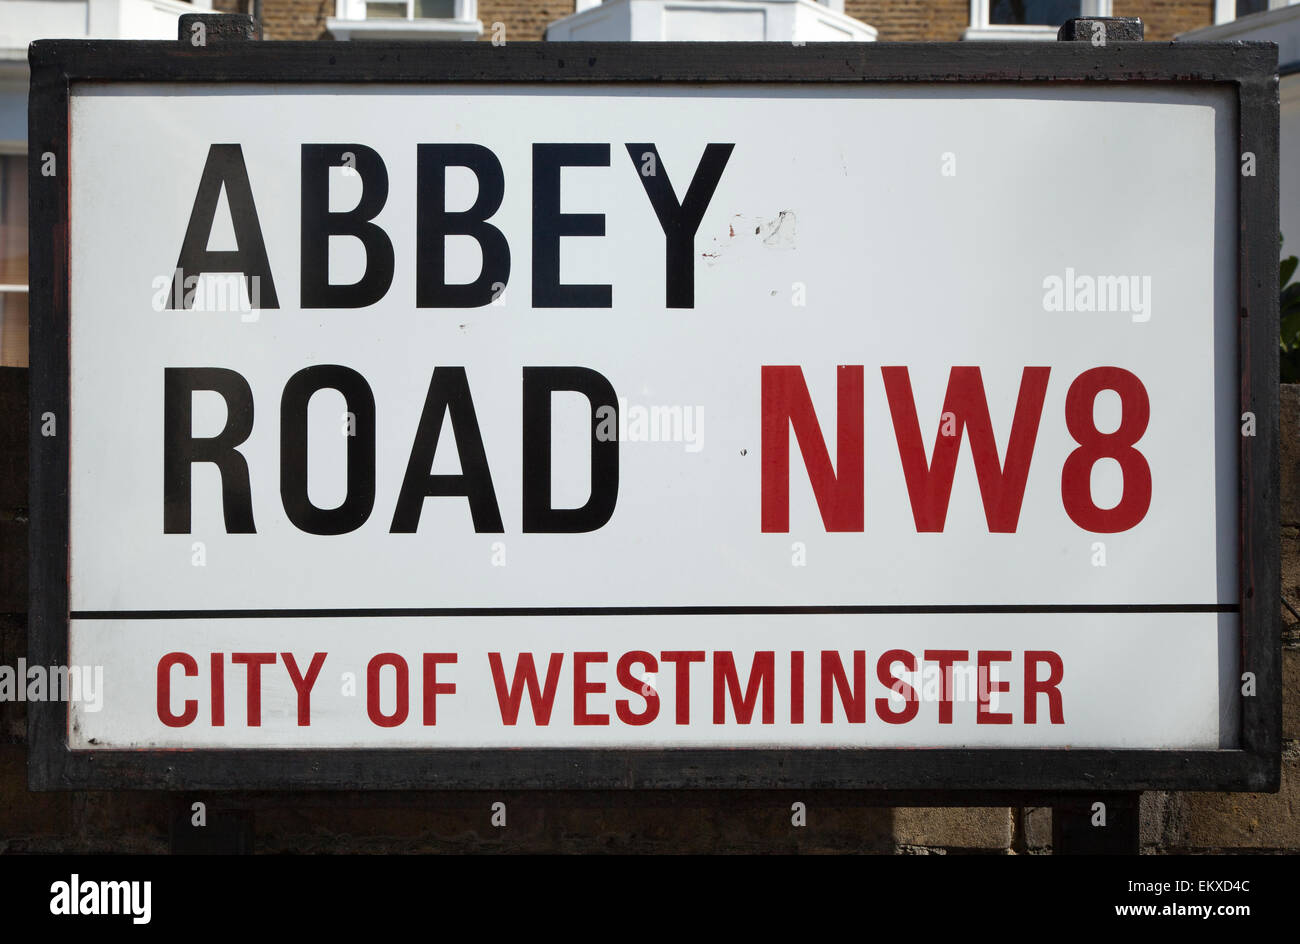 Abbey road street sign, close to Abbey Road Studio, London Stock Photo